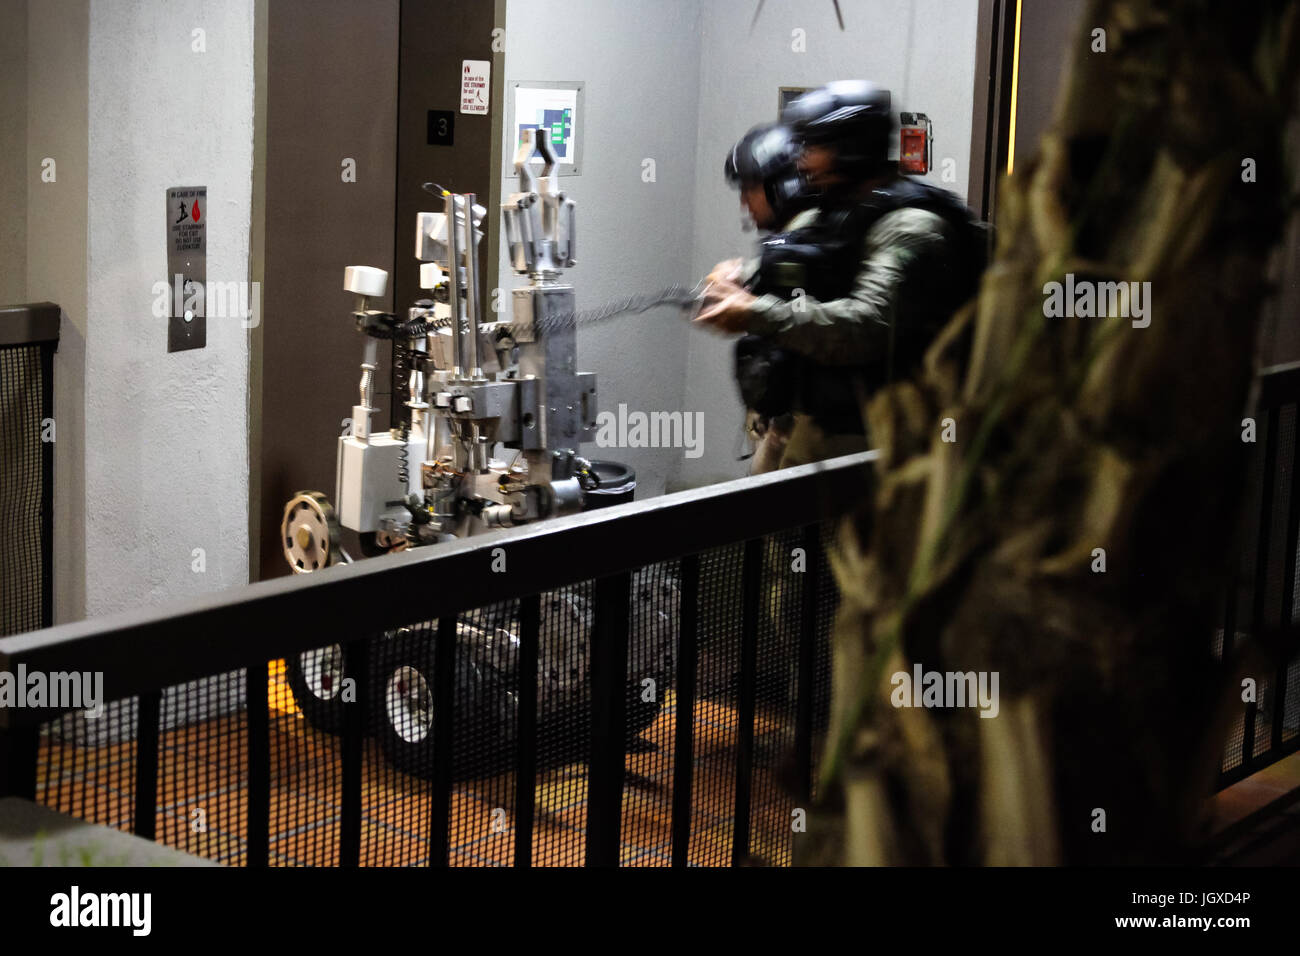 Los Angeles, USA. 11th Jul, 2017. SWAT Officers raid an apartment during an armed stand-off in the Los Feliz area of Los Angeles on July 11, 2017 while hunting for the killer of Israel Corpus of Tustin, California. Credit: Corey Bodoh-Creed/Alamy Live News Stock Photo